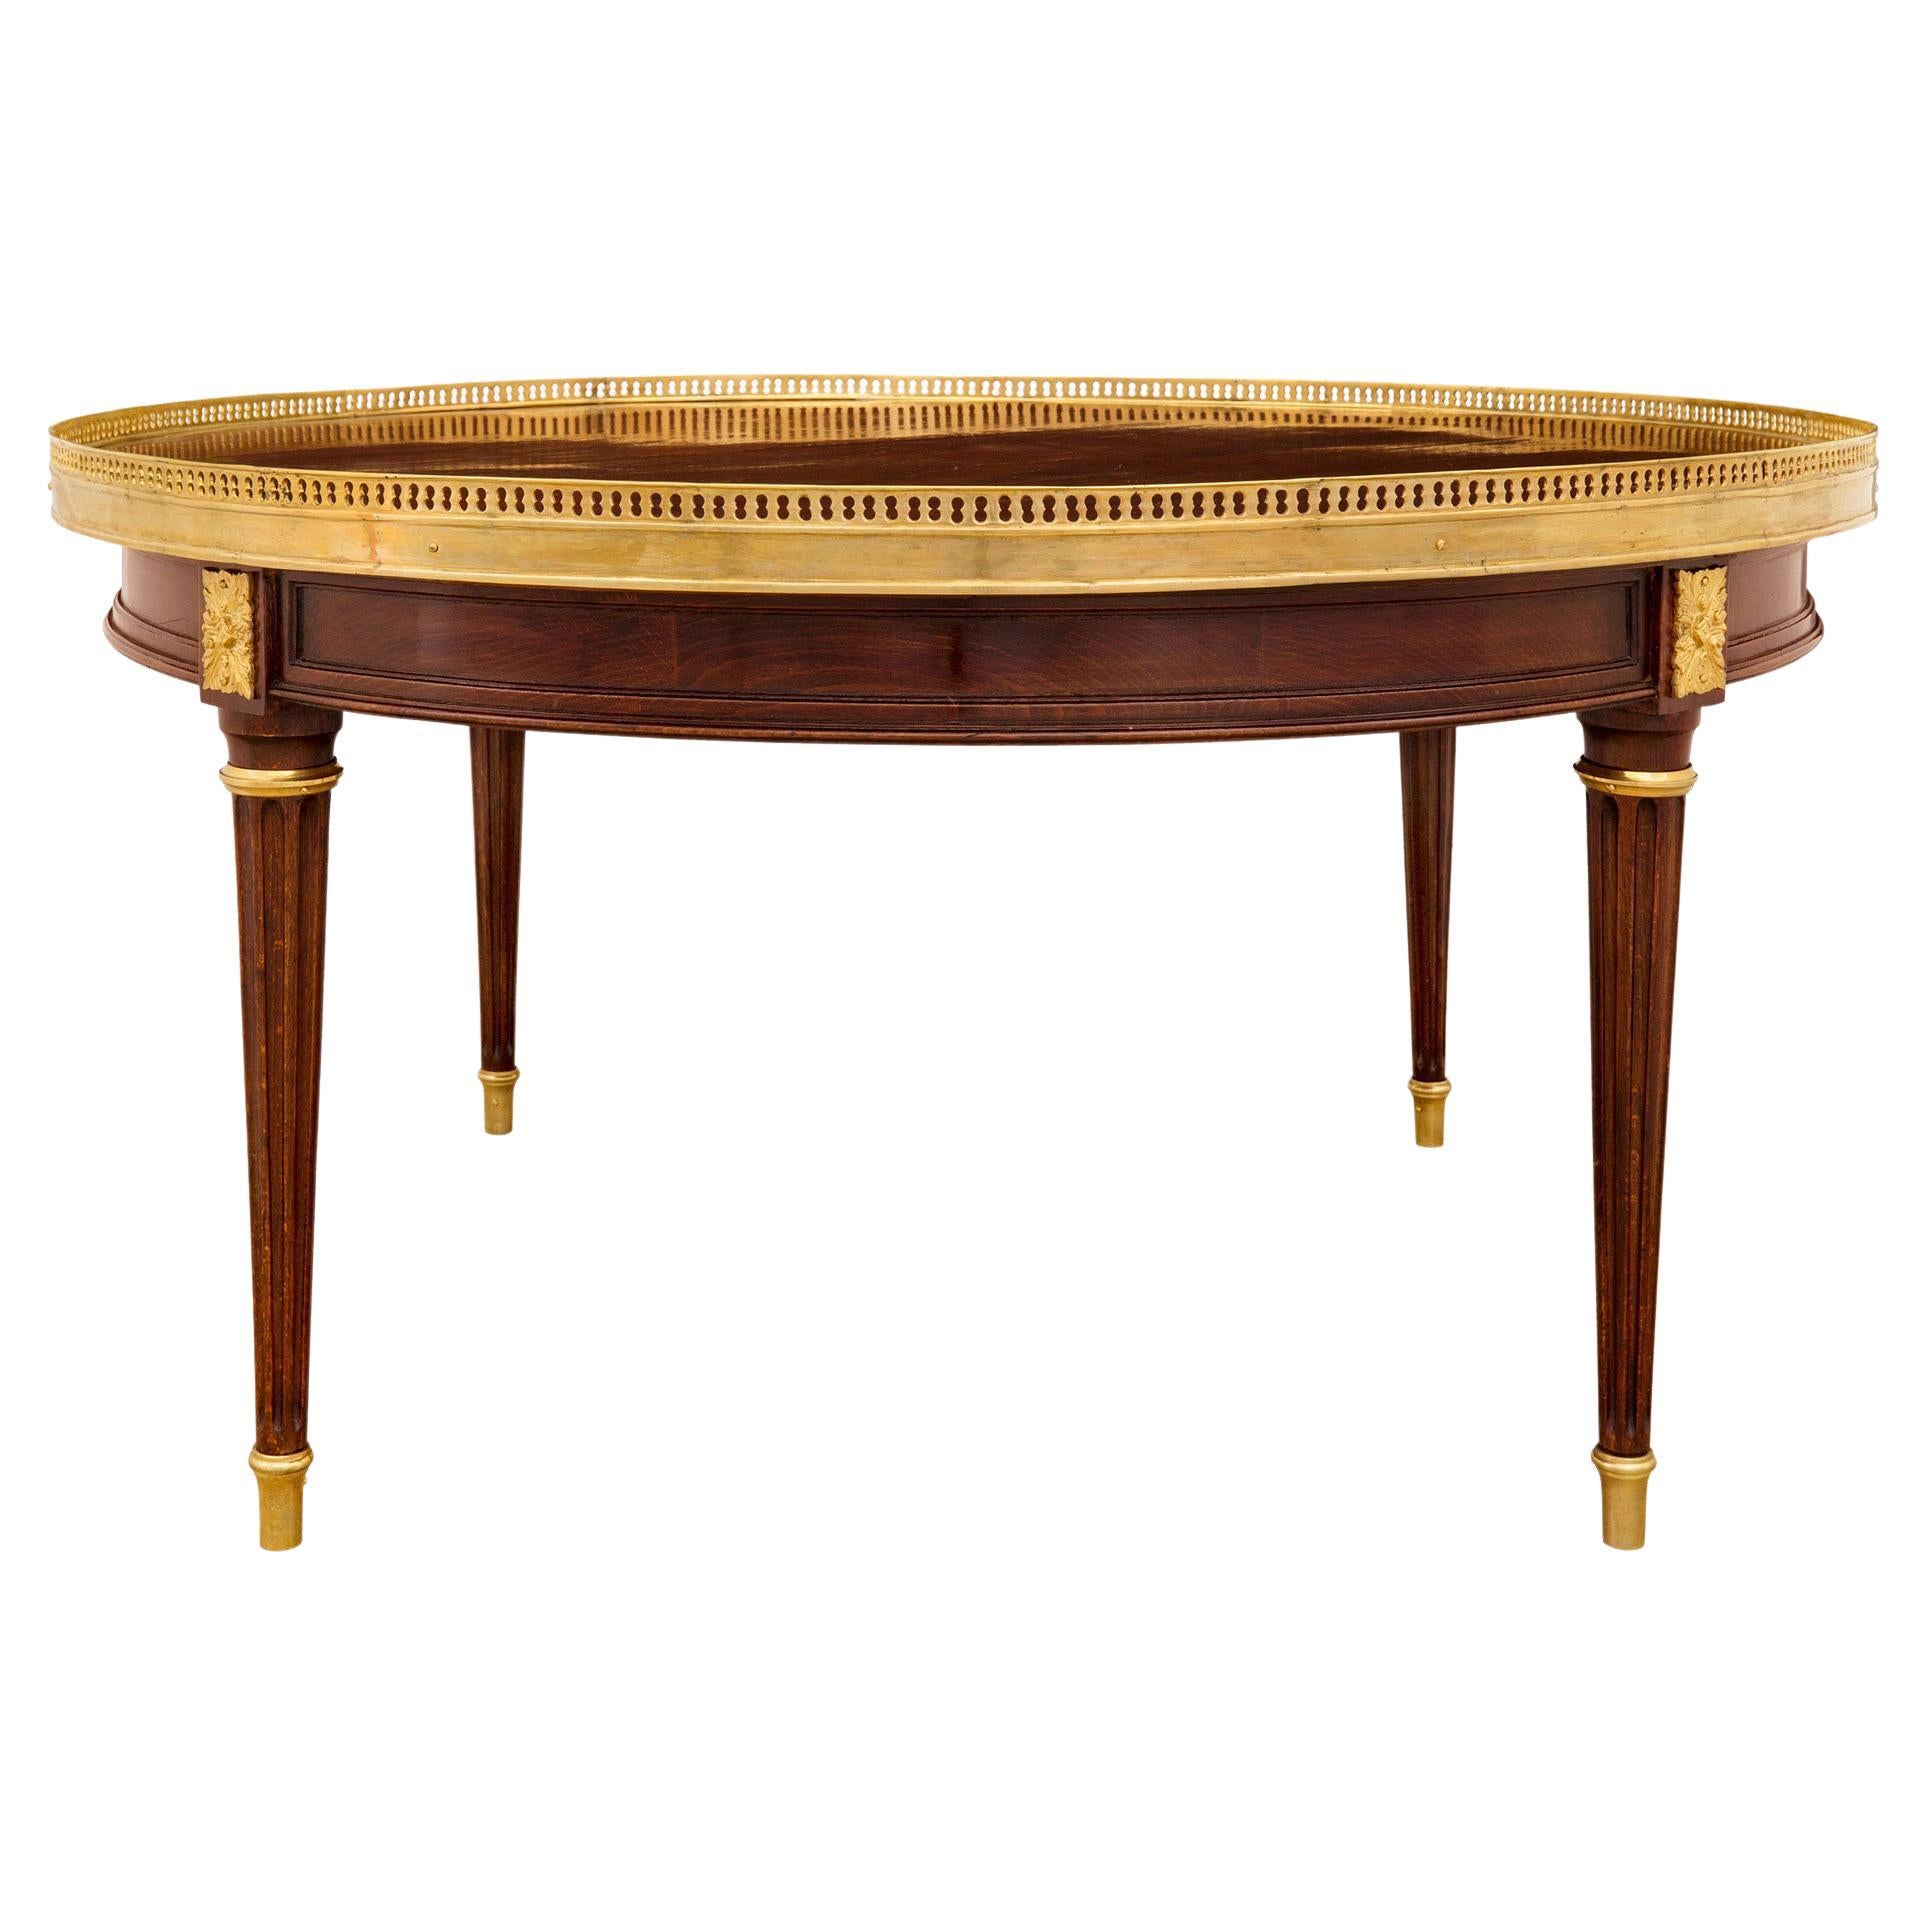 French Louis XVI Style Mahogany and Ormolu Cocktail or Coffee Table